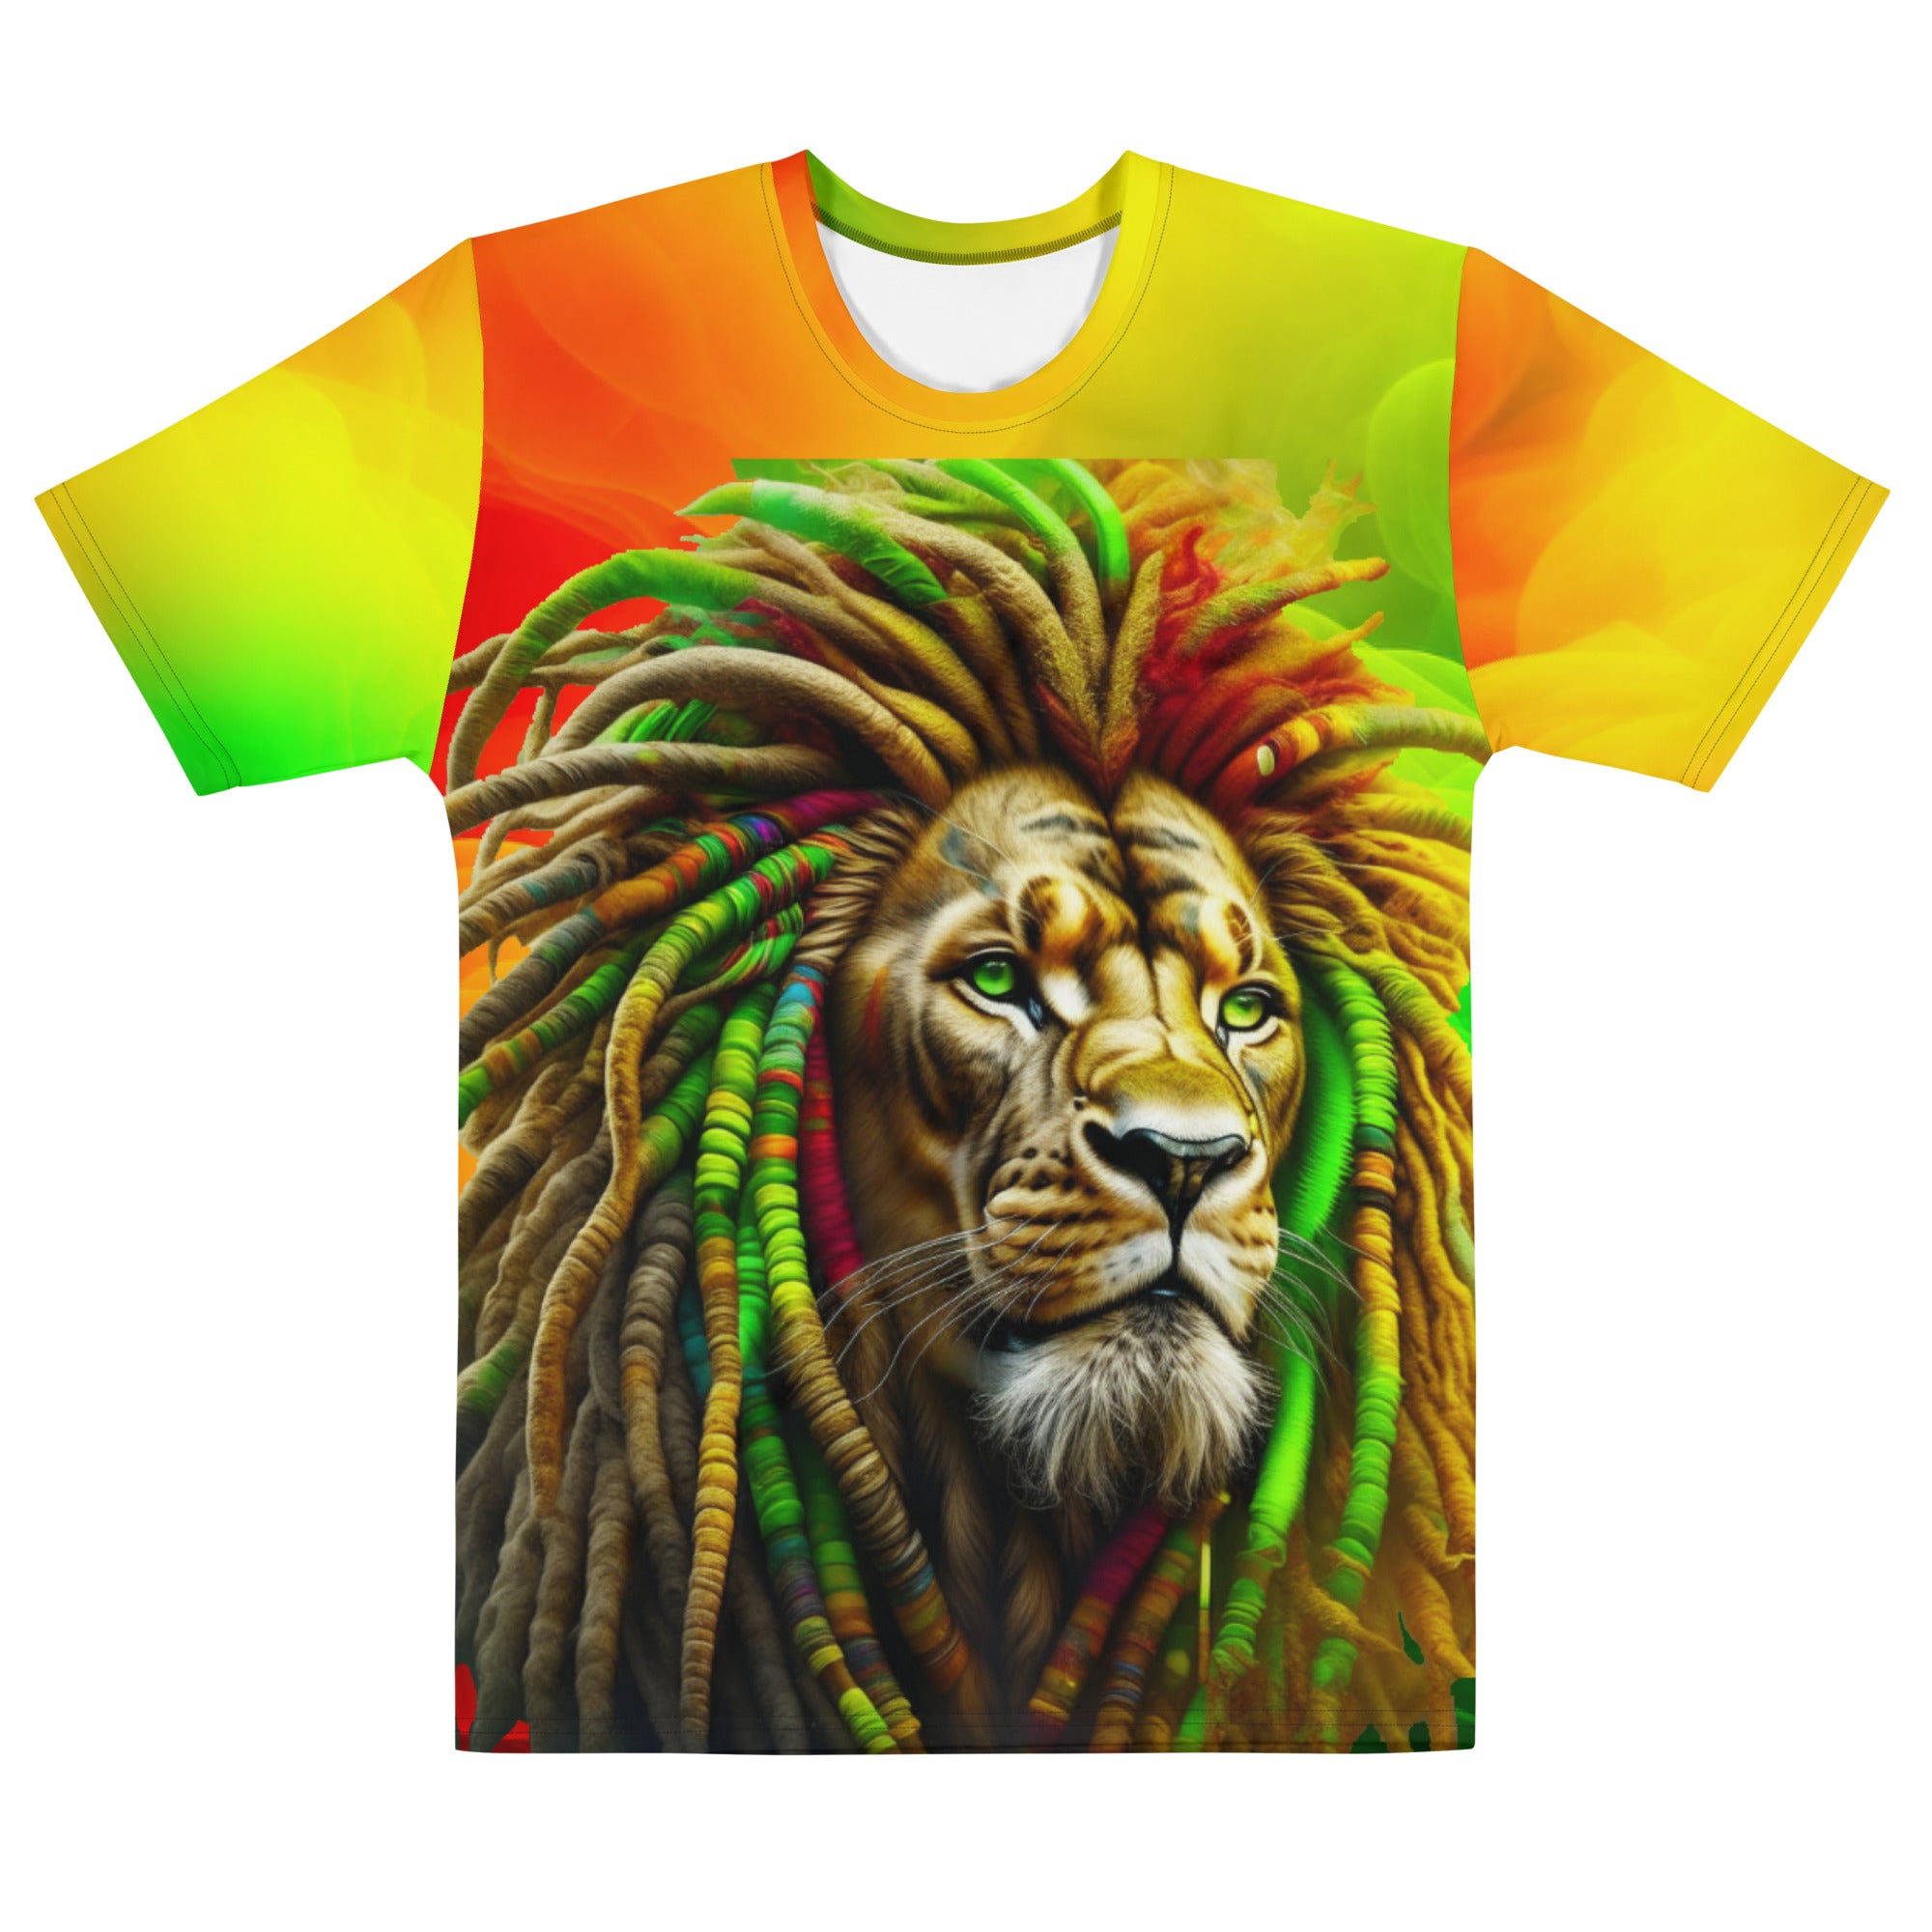 his men's REGGATEK RAVER FESTIVAL T-SHIRT is perfect for anyone who loves reggaetek music. Featuring colorful REGGAE motifs and a lion Festival Rave Design, you'll be ready to Party all Night Long. High-quality fabrics promise a comfortable fit and long-lasting wear.